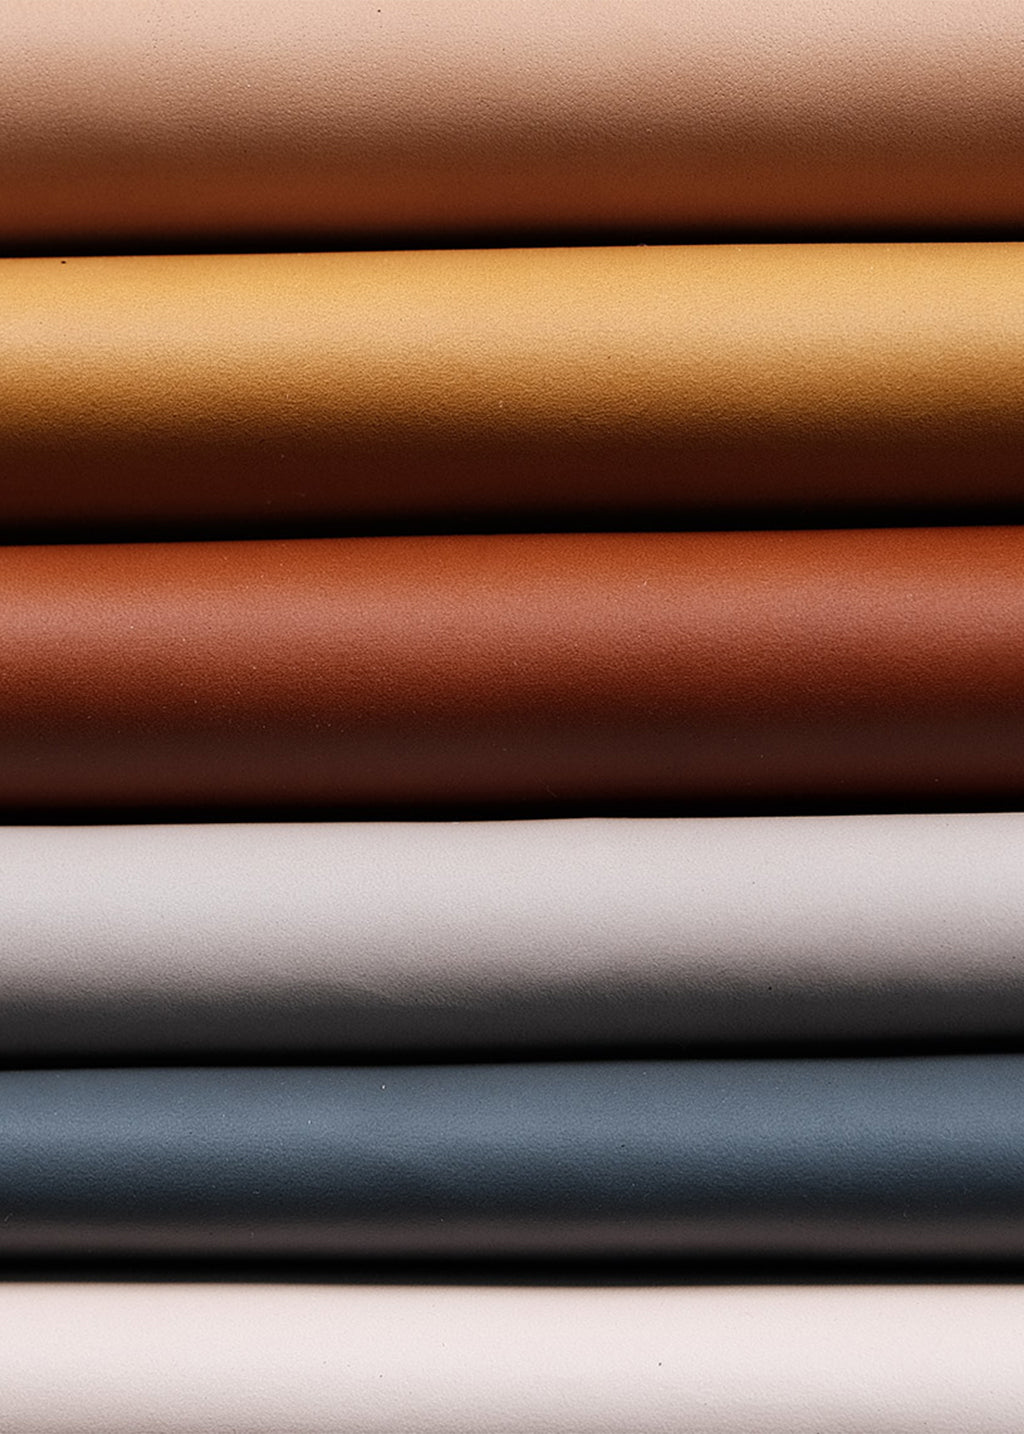 MODHER- Our sustainable leather